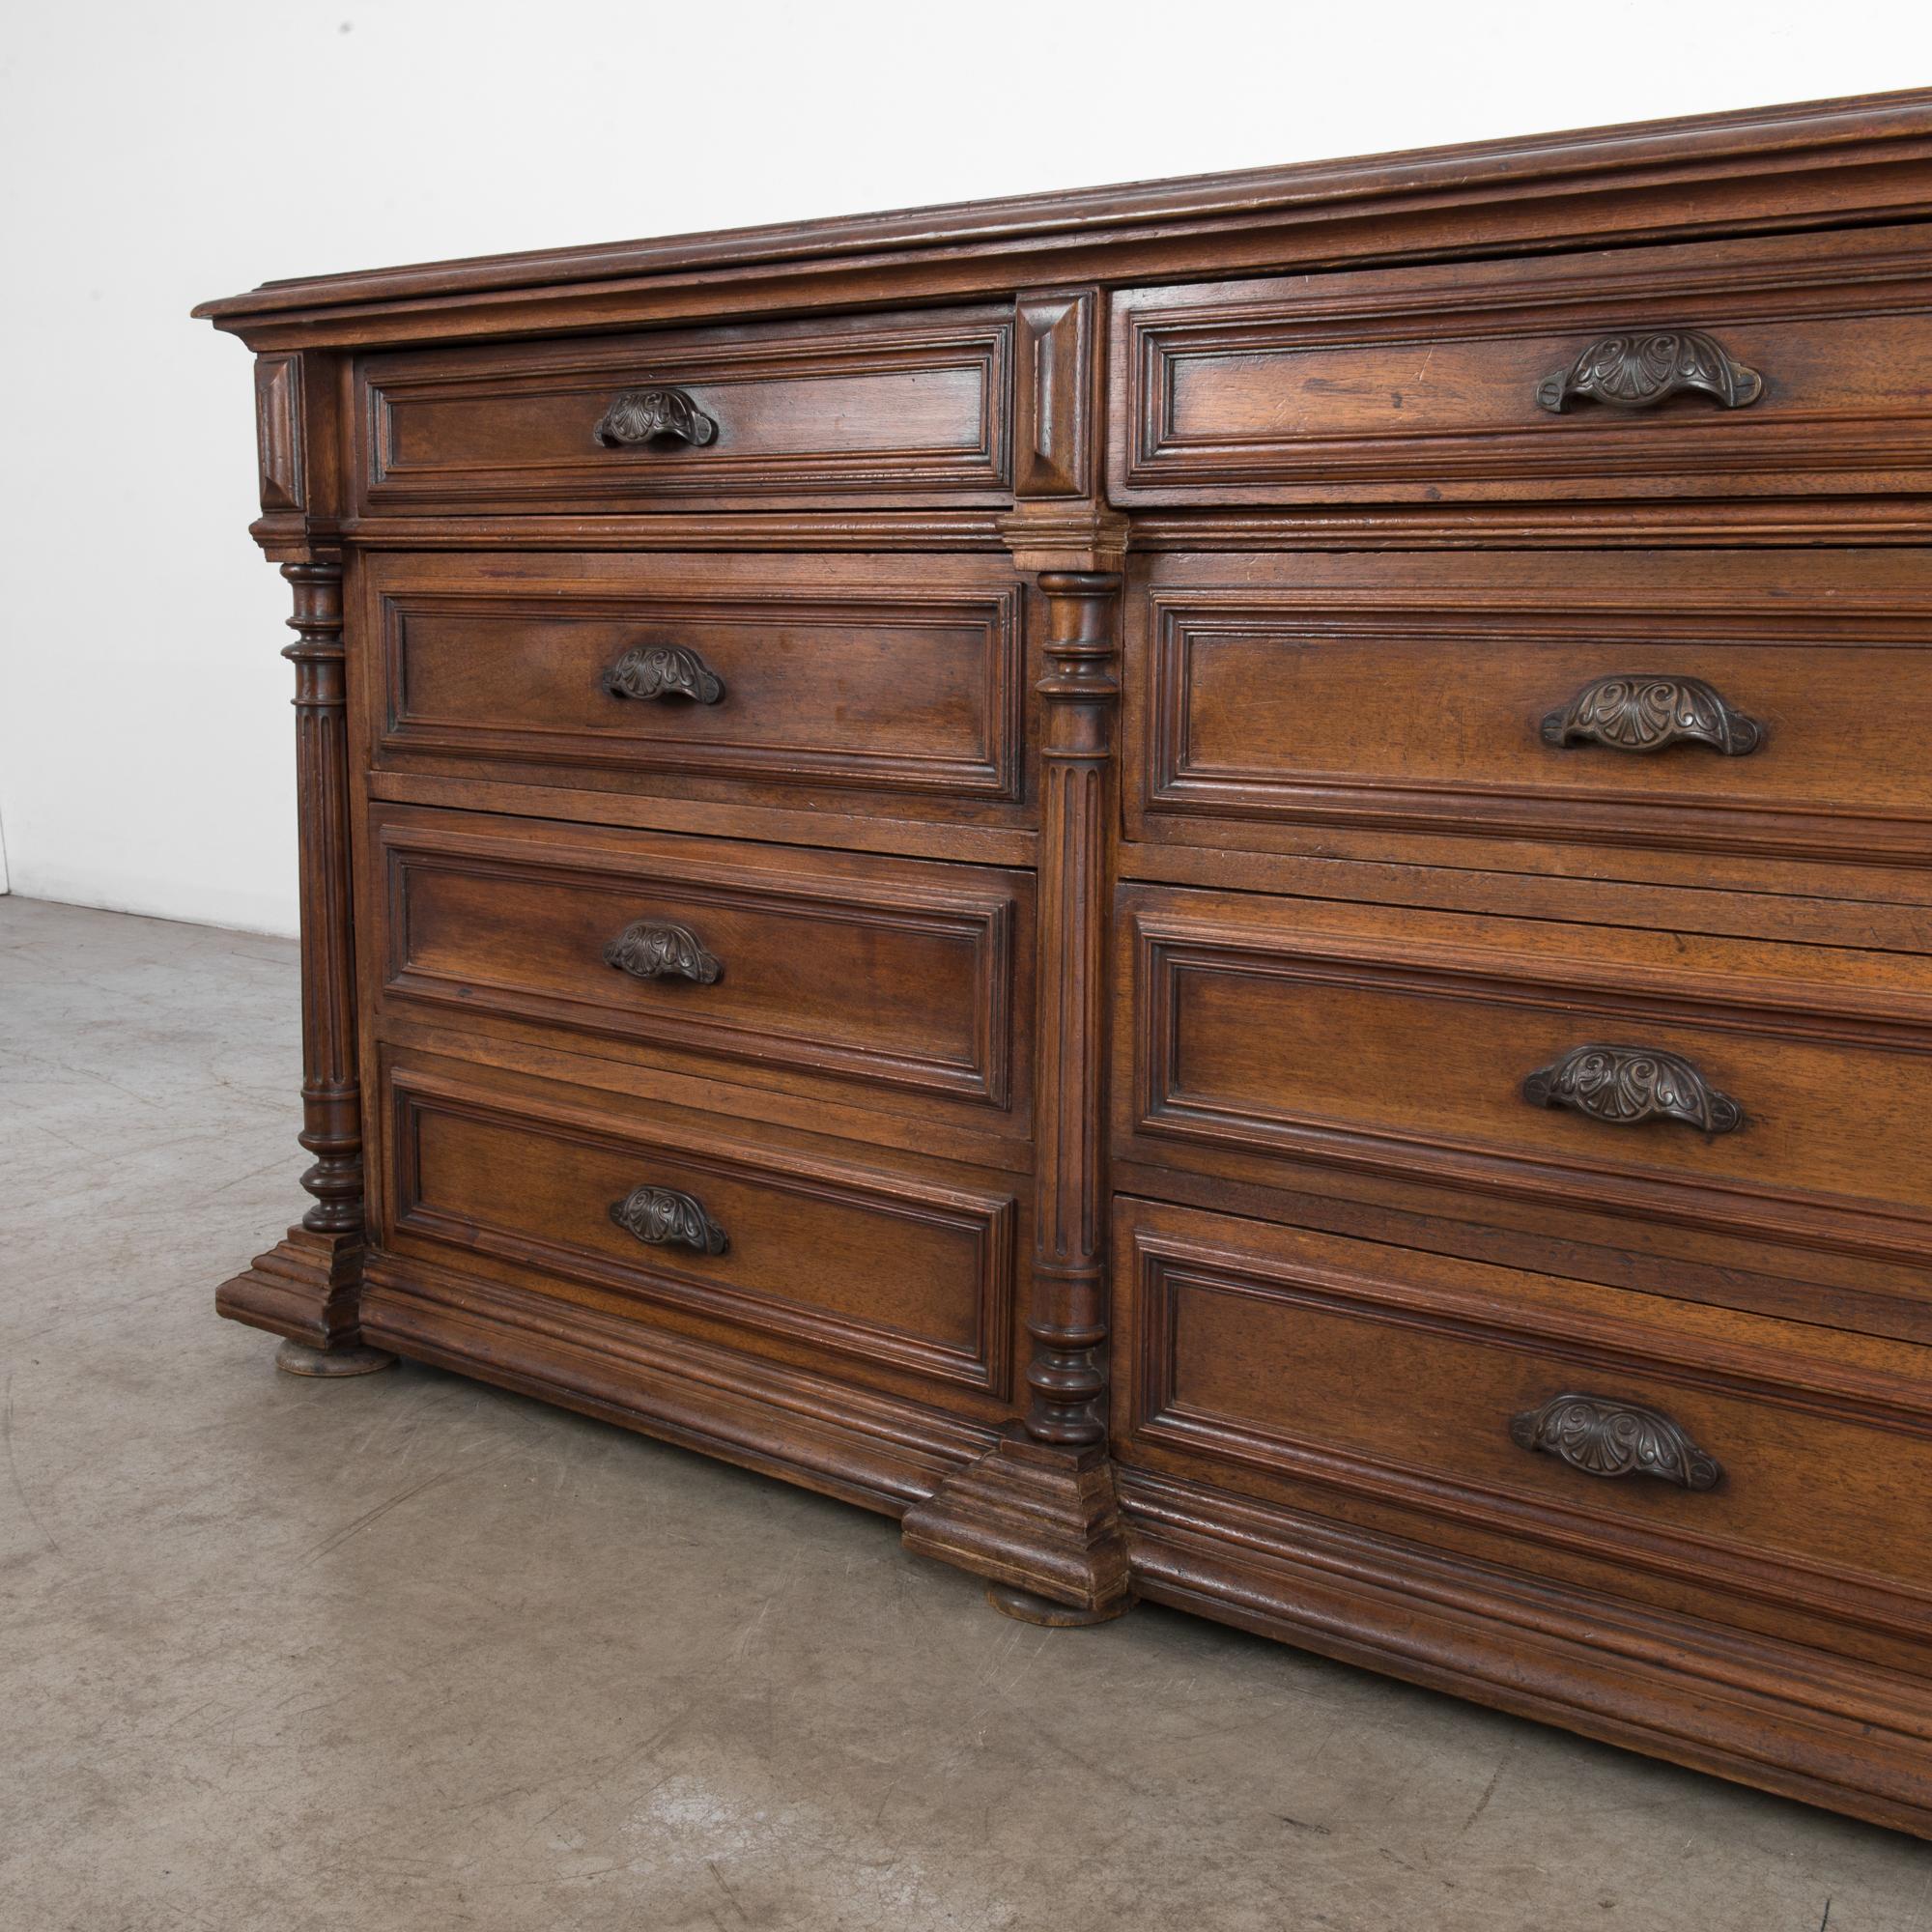 1880s French Provincial Console Drawer Chest 4